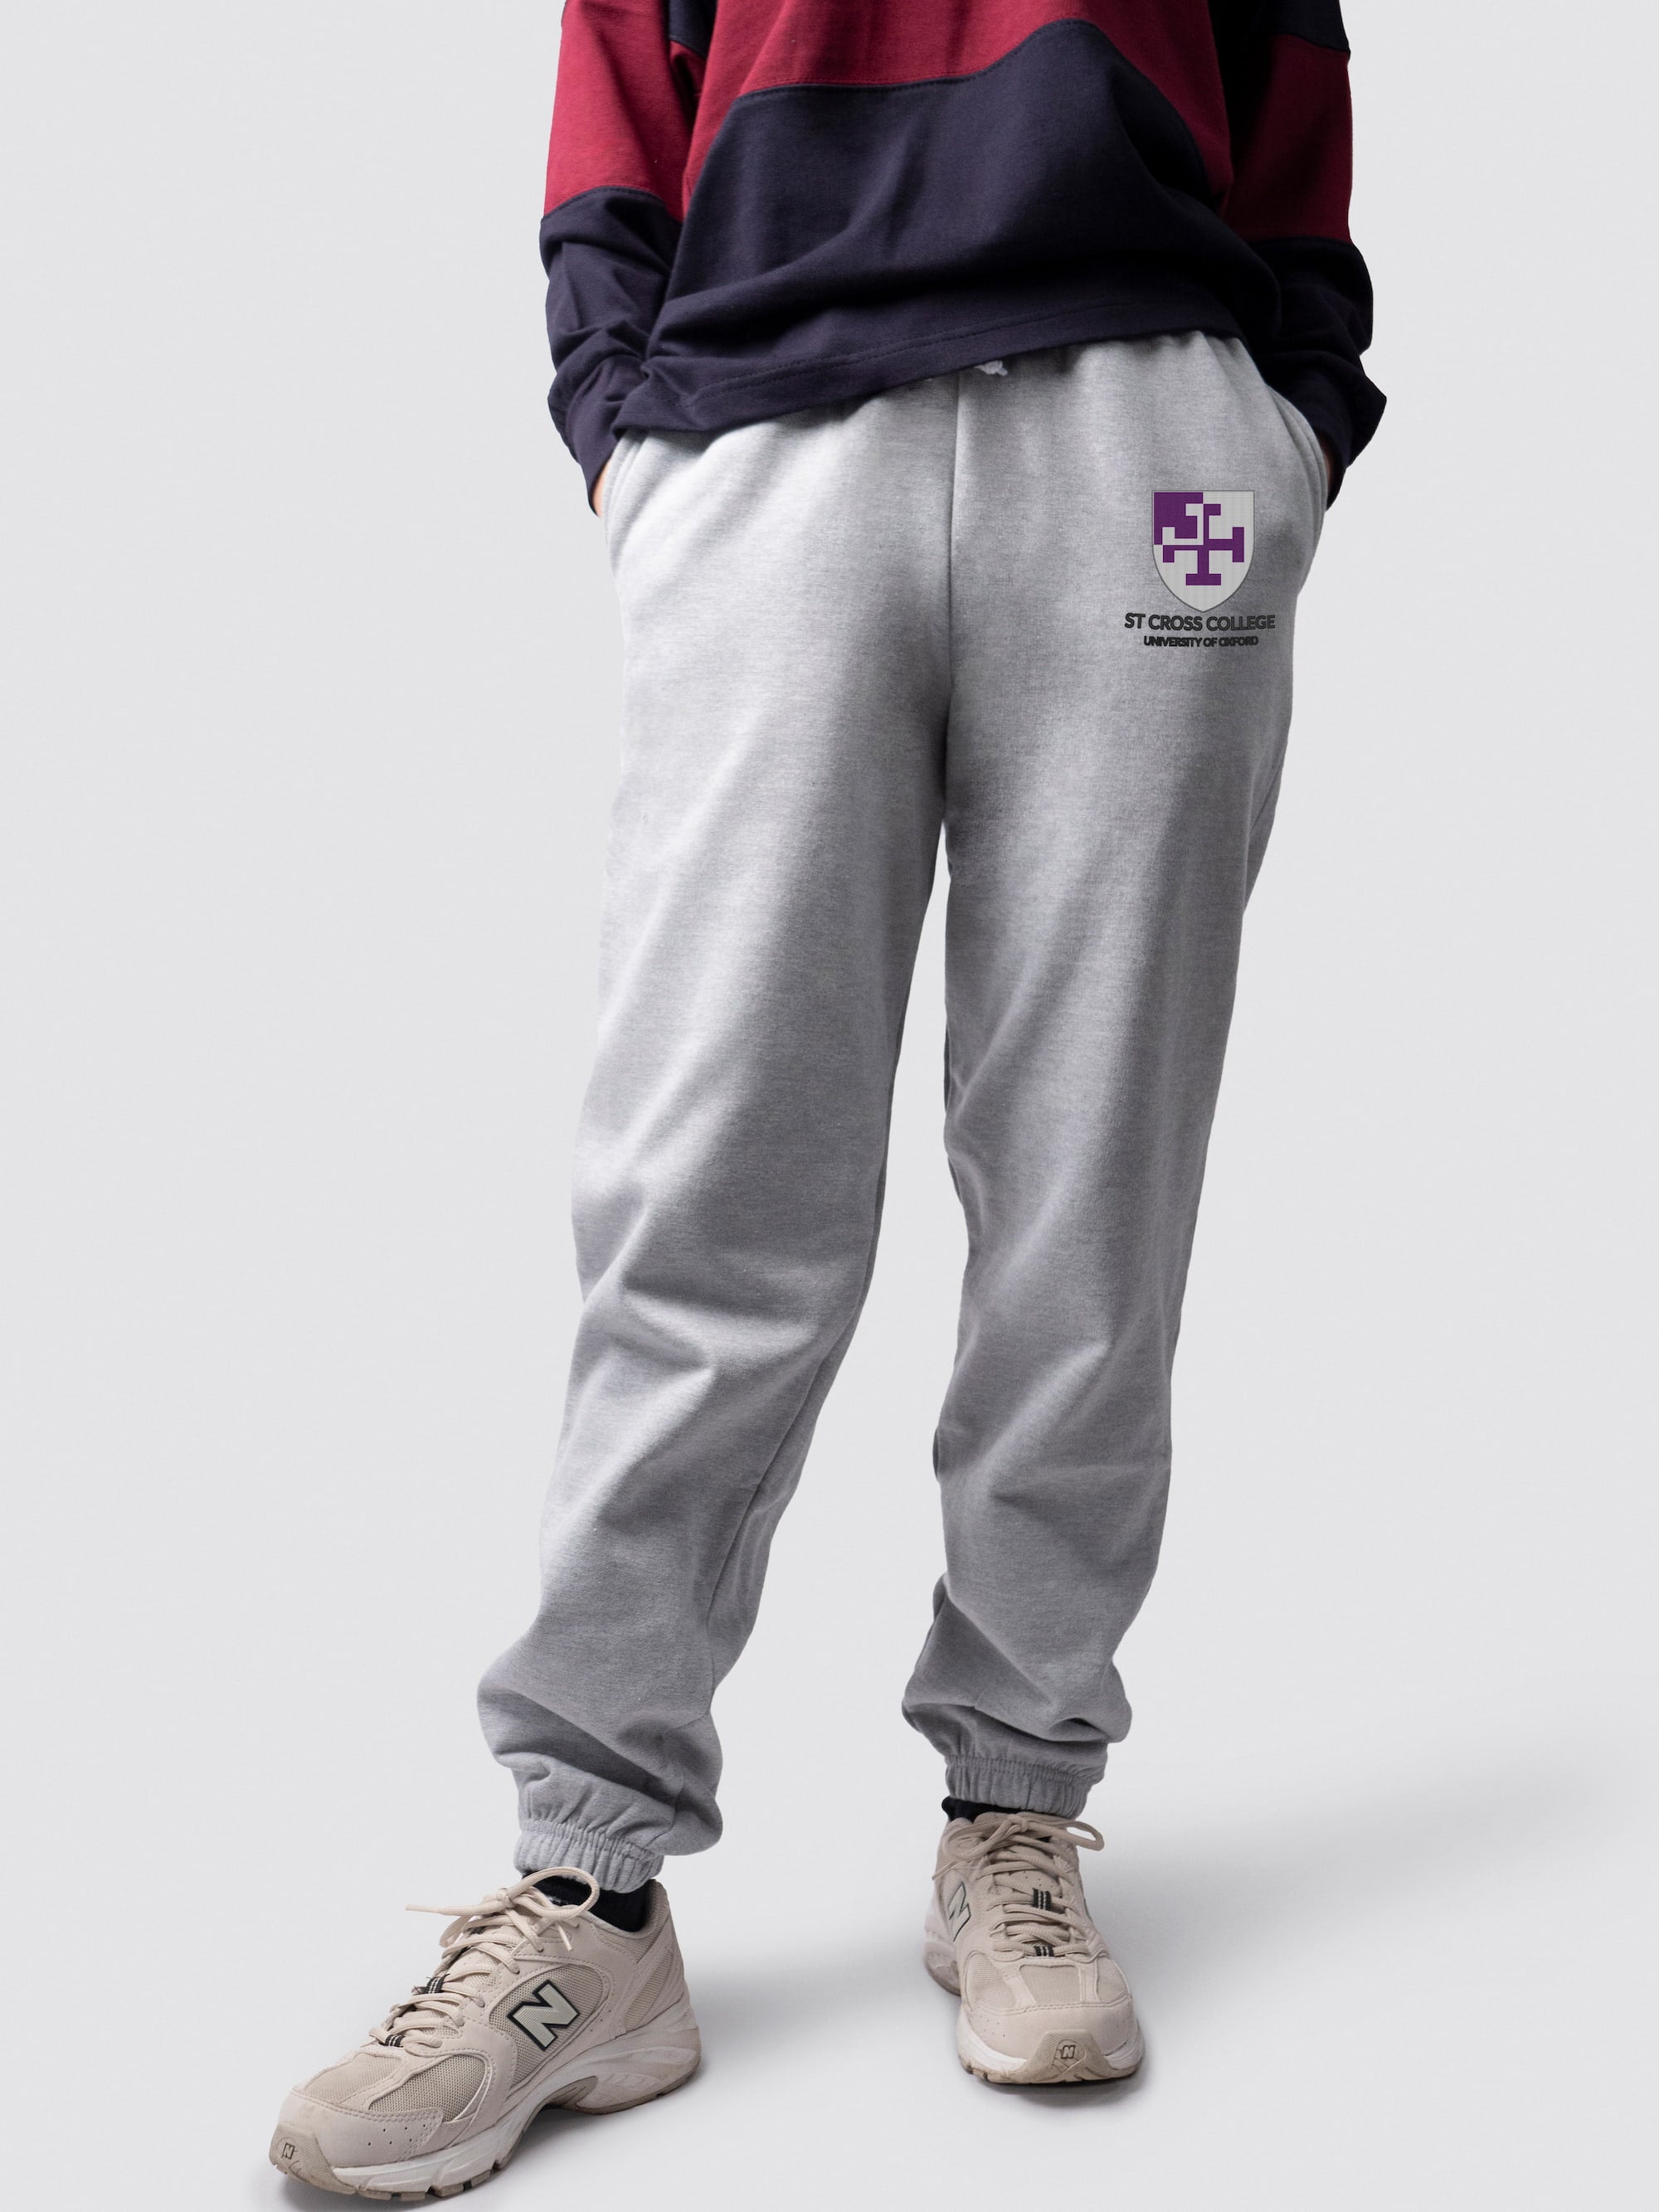 undergraduate cuffed sweatpants, made from soft cotton fabric, with St Cross logo